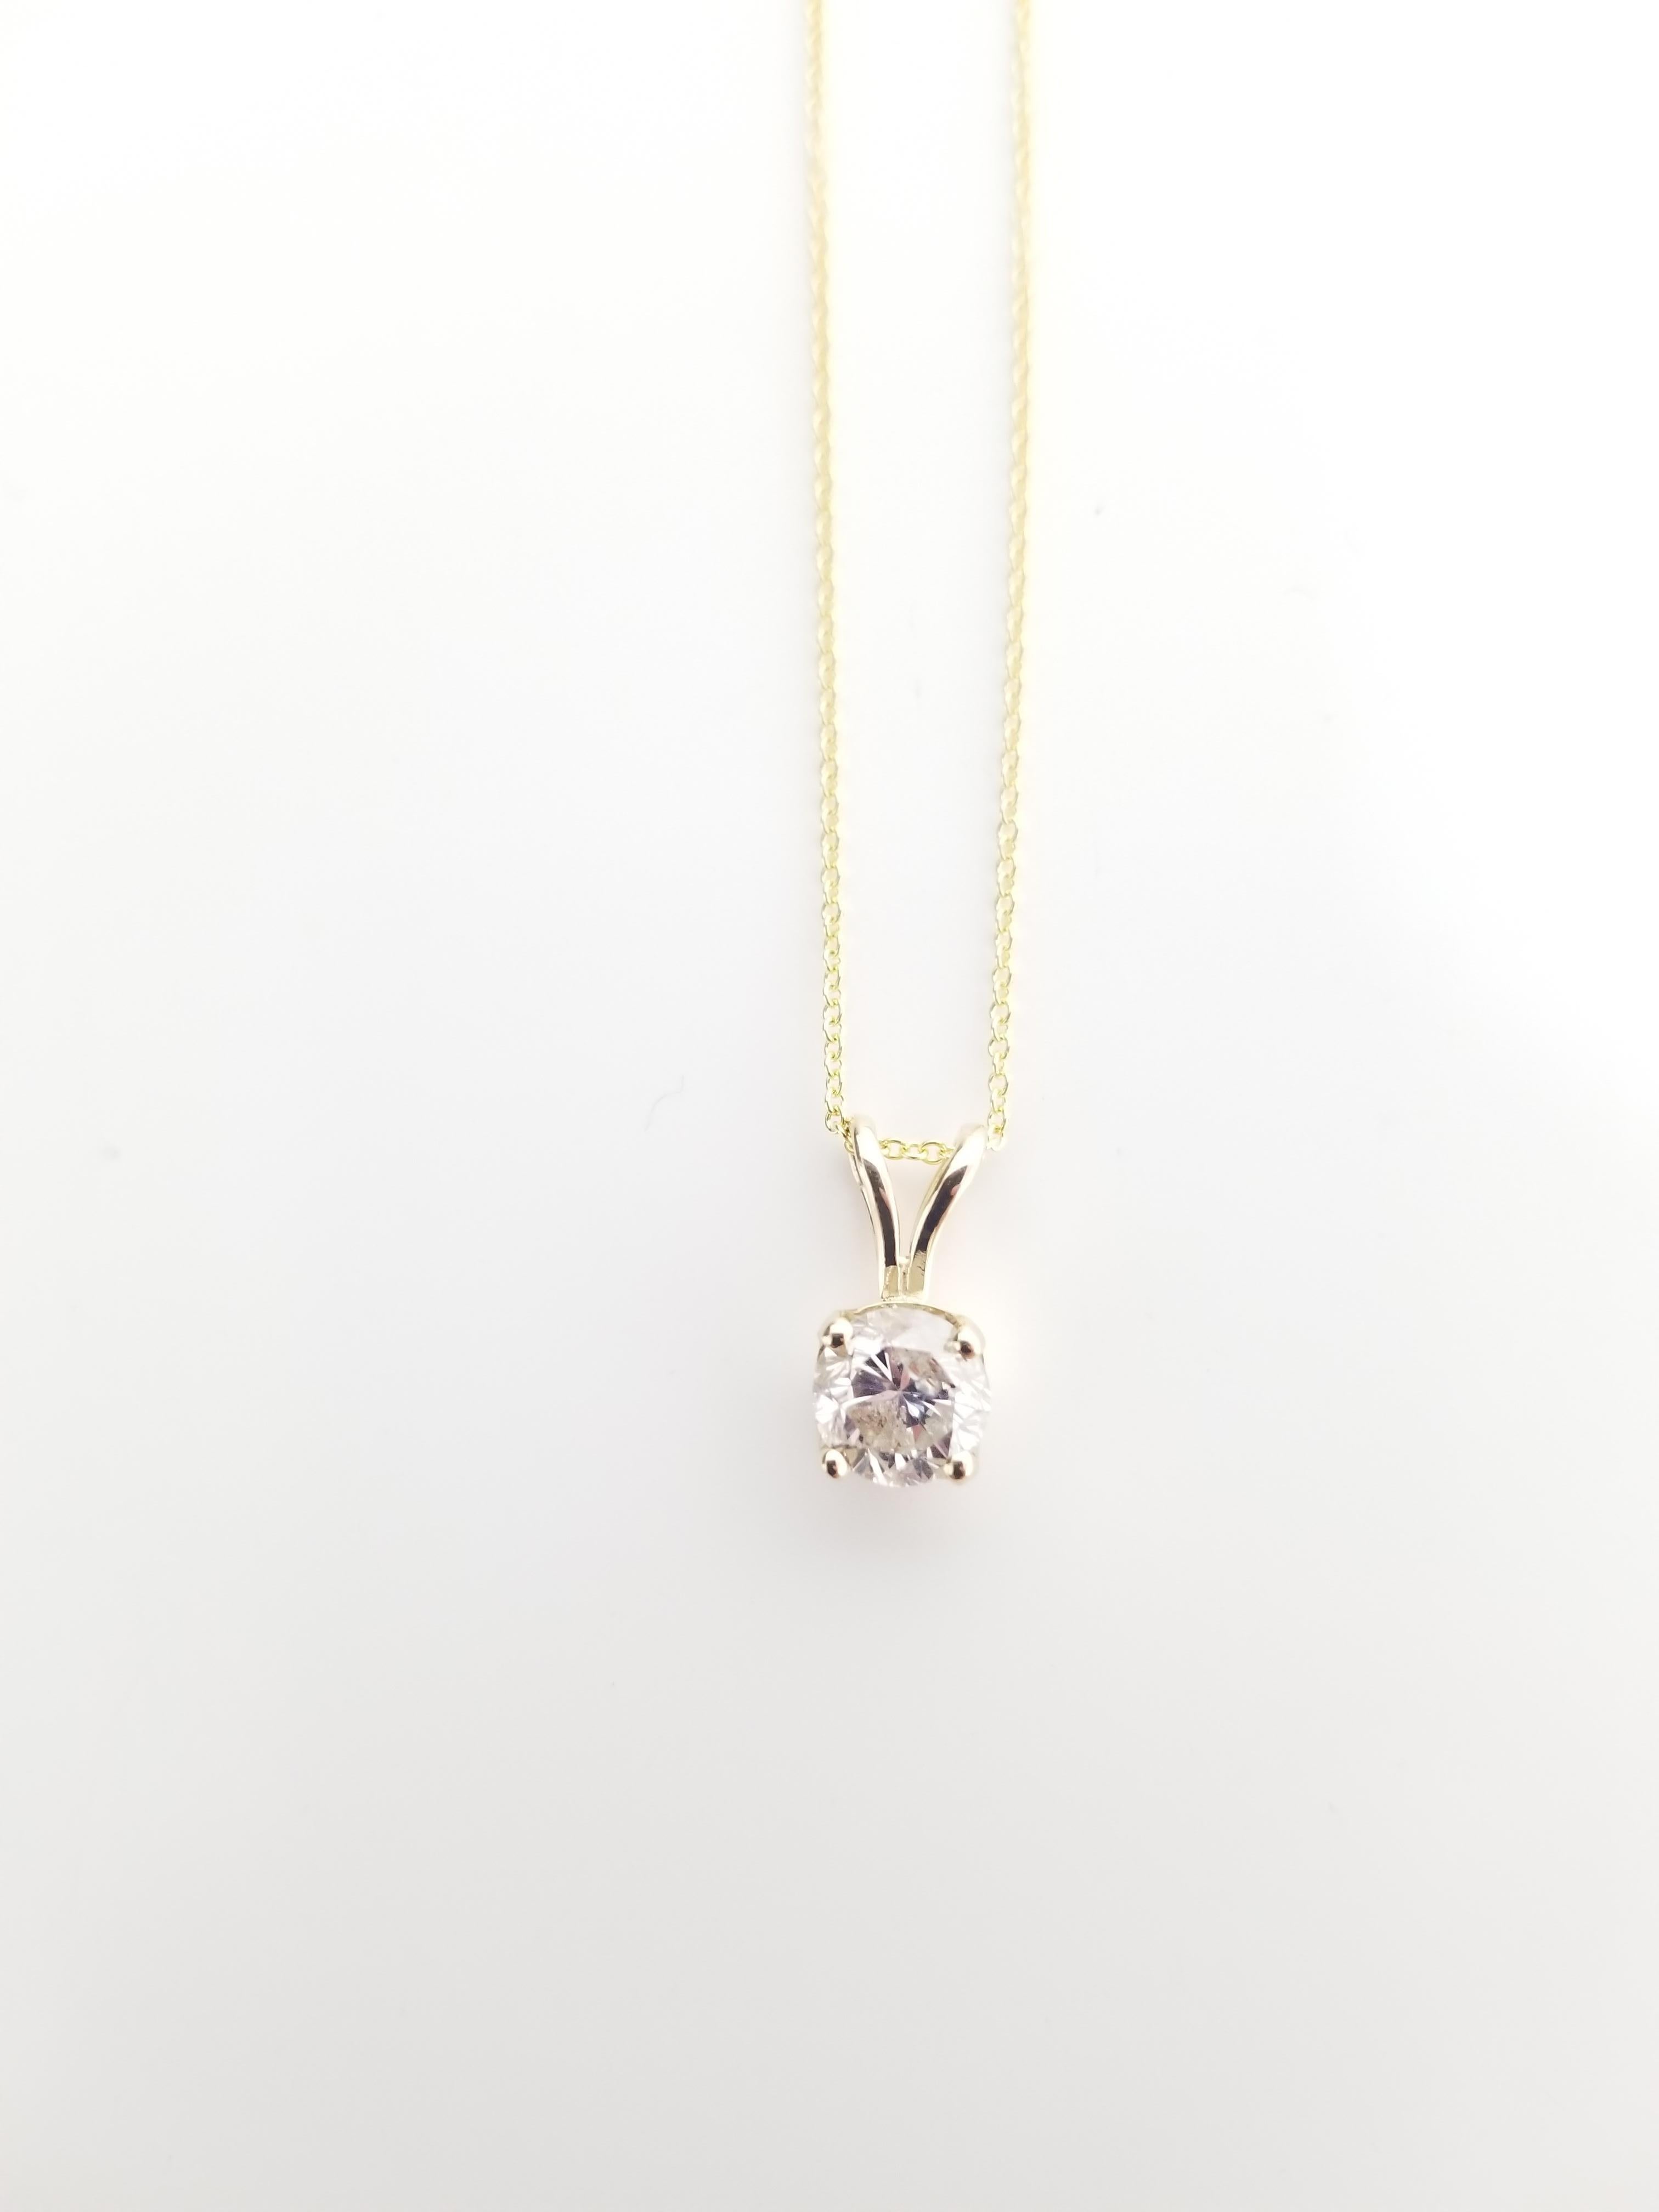 Gorgeous diamond pendant, 0.80 ct GIA round brilliant cut diamonds. set in 14k yellow gold. pendant measures approximately 0.5 inch length and 0.25 inch wide.

(Pendant Only - Chain sold separately)